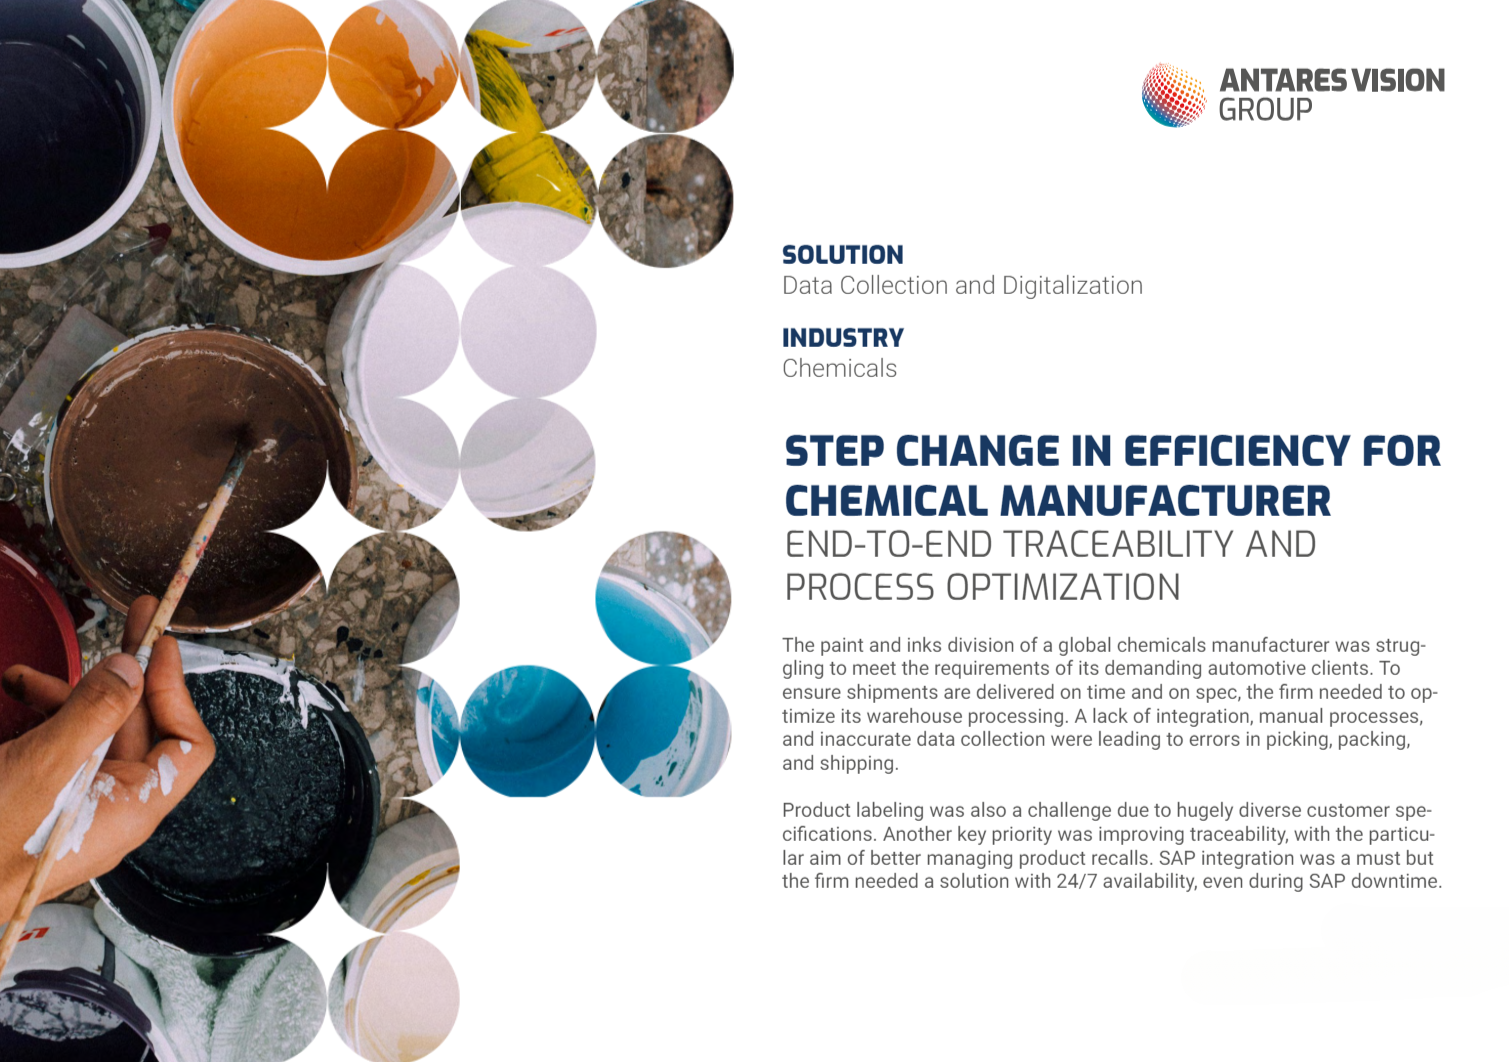 Step change in efficiency for chemical manufacturer